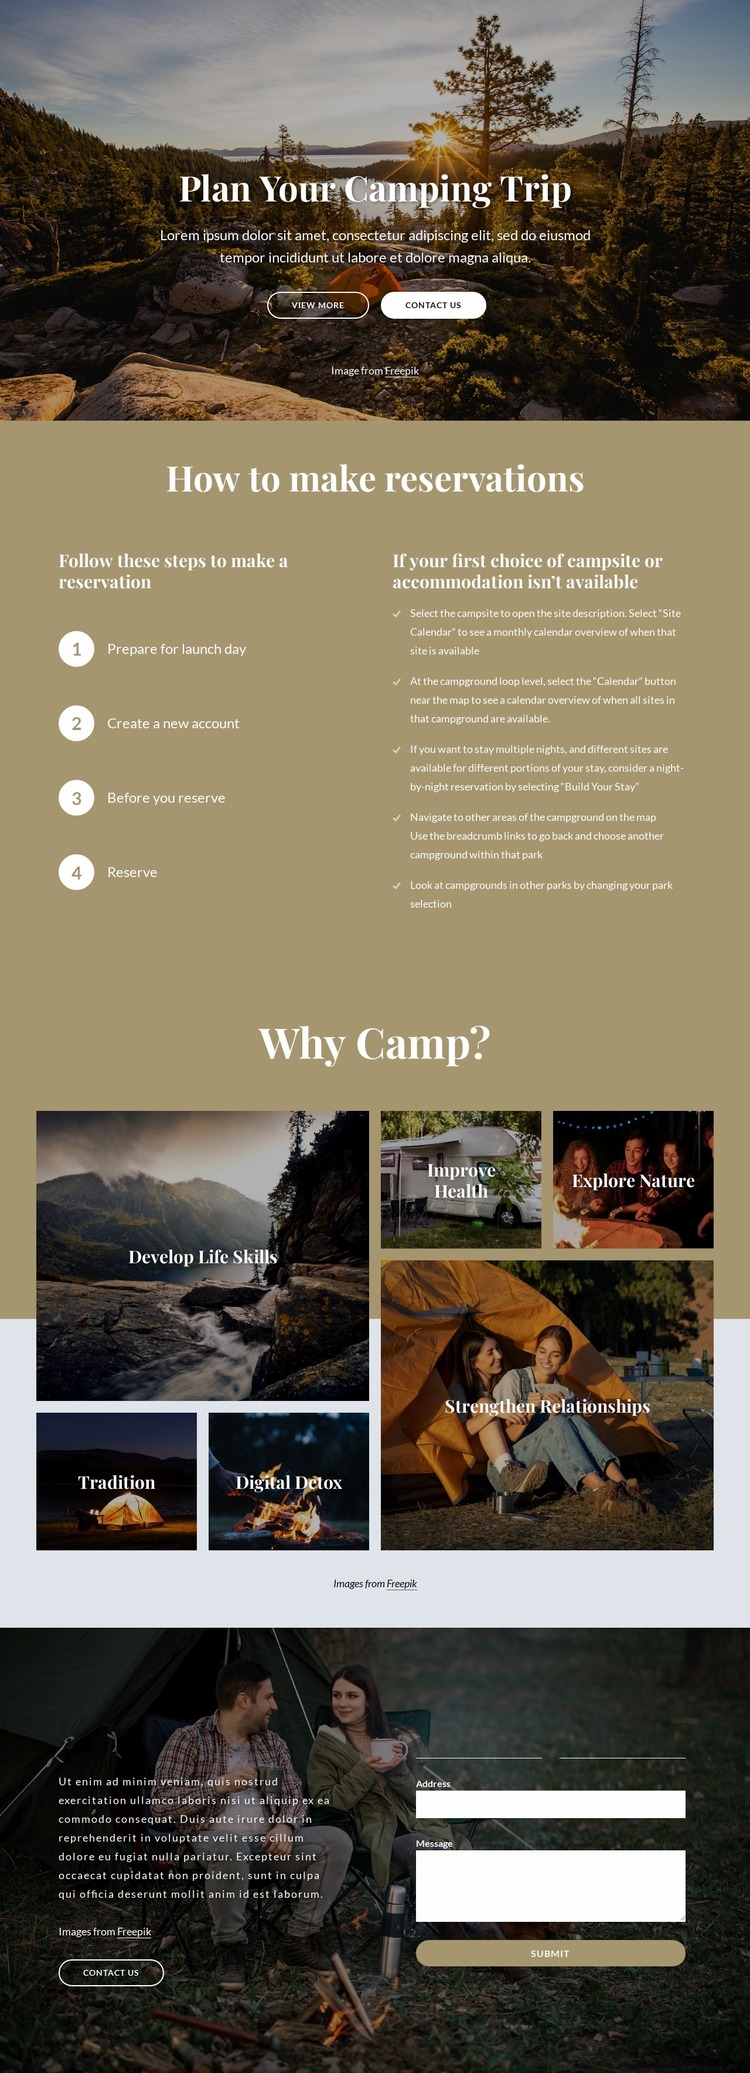 Plan your camping trip Website Mockup